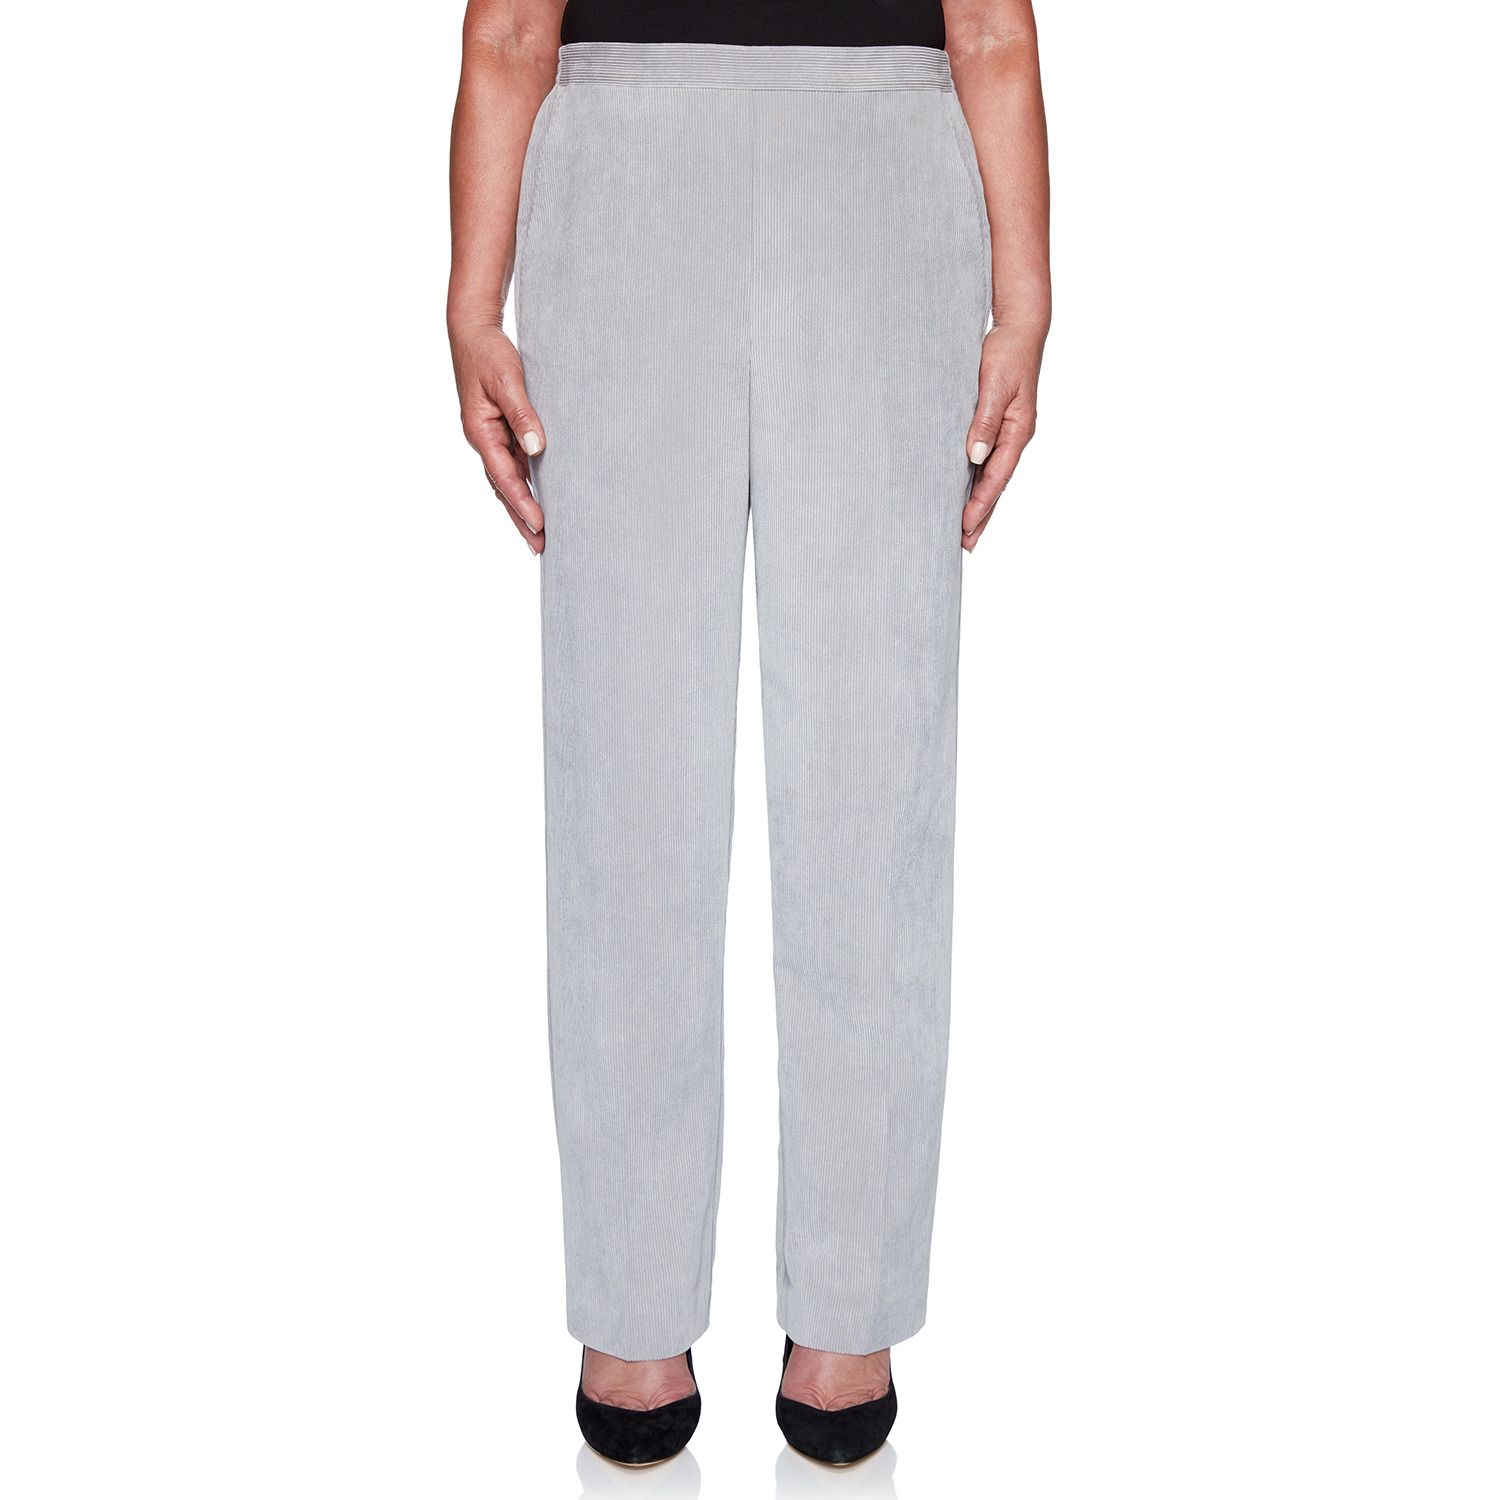 Petite Alfred Dunner Corduroy Pull-On Pants